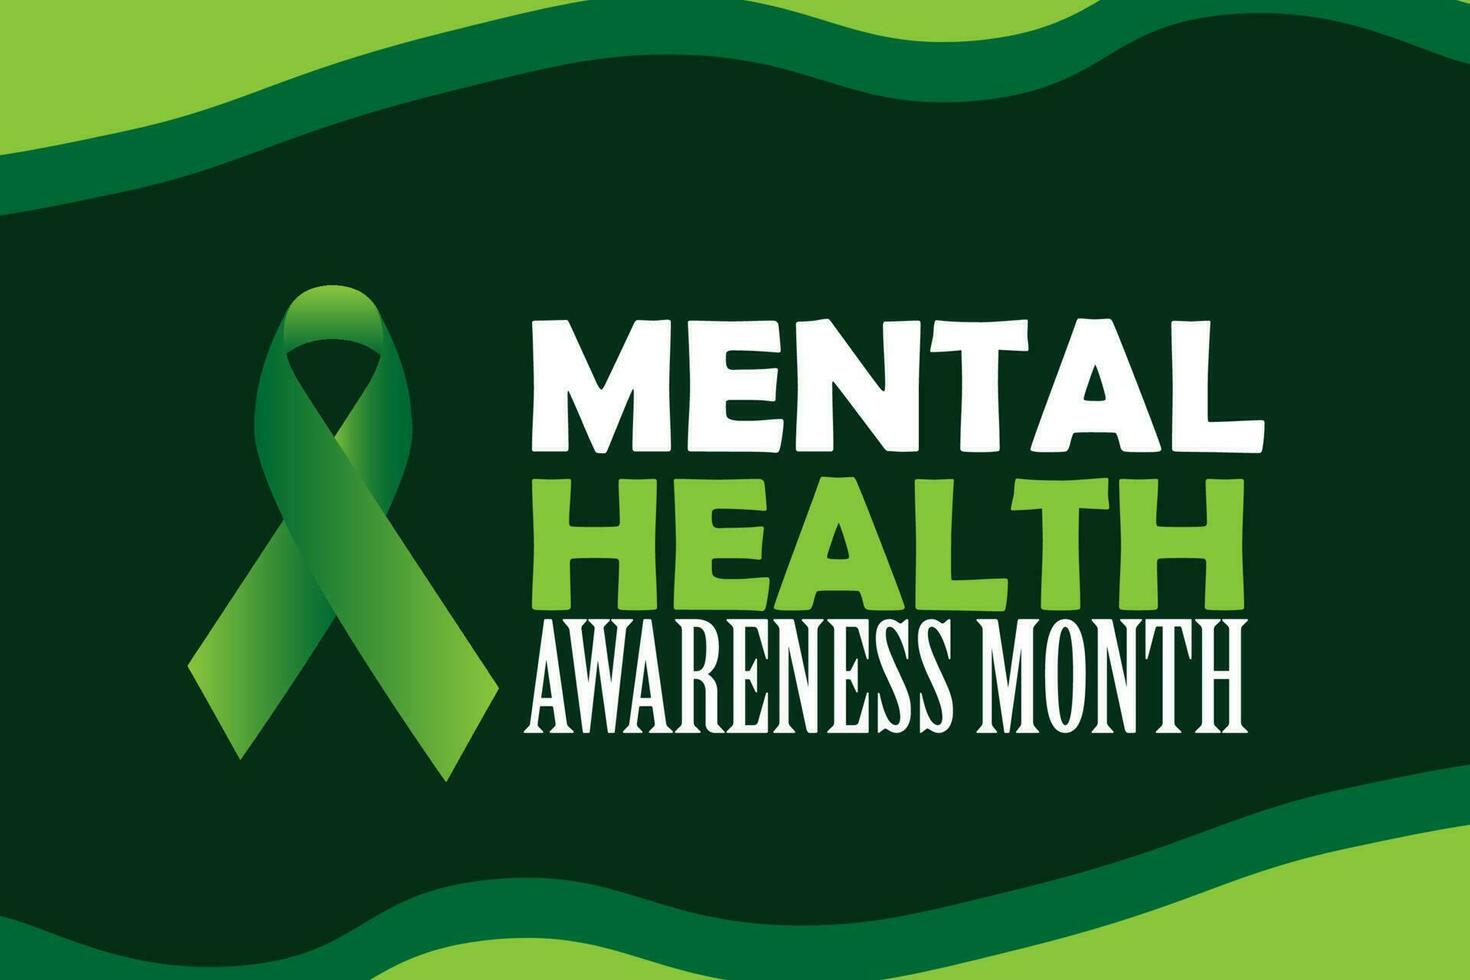 Mental Health Awareness Month in May. Annual campaign in United States. Raising awareness of mental health. vector